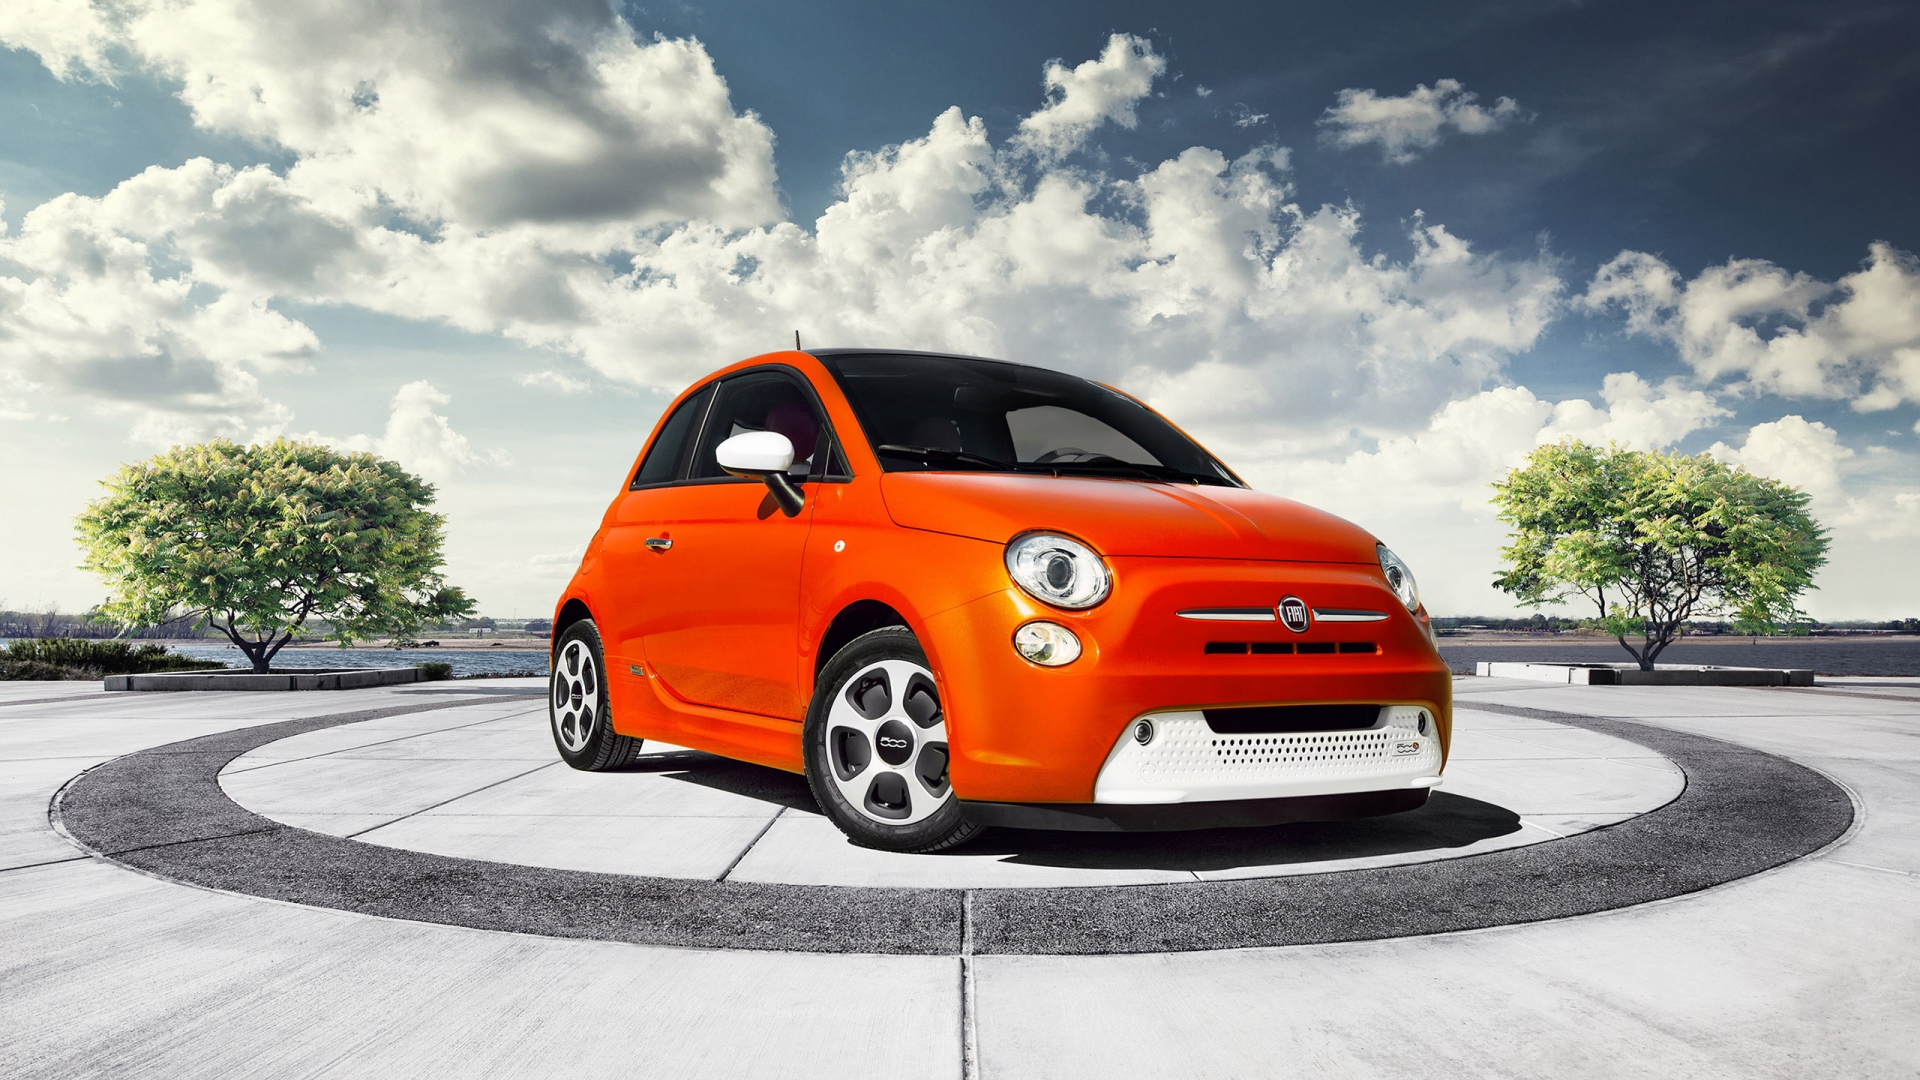 Fiat 500 2013 Edition for 1920 x 1080 HDTV 1080p resolution